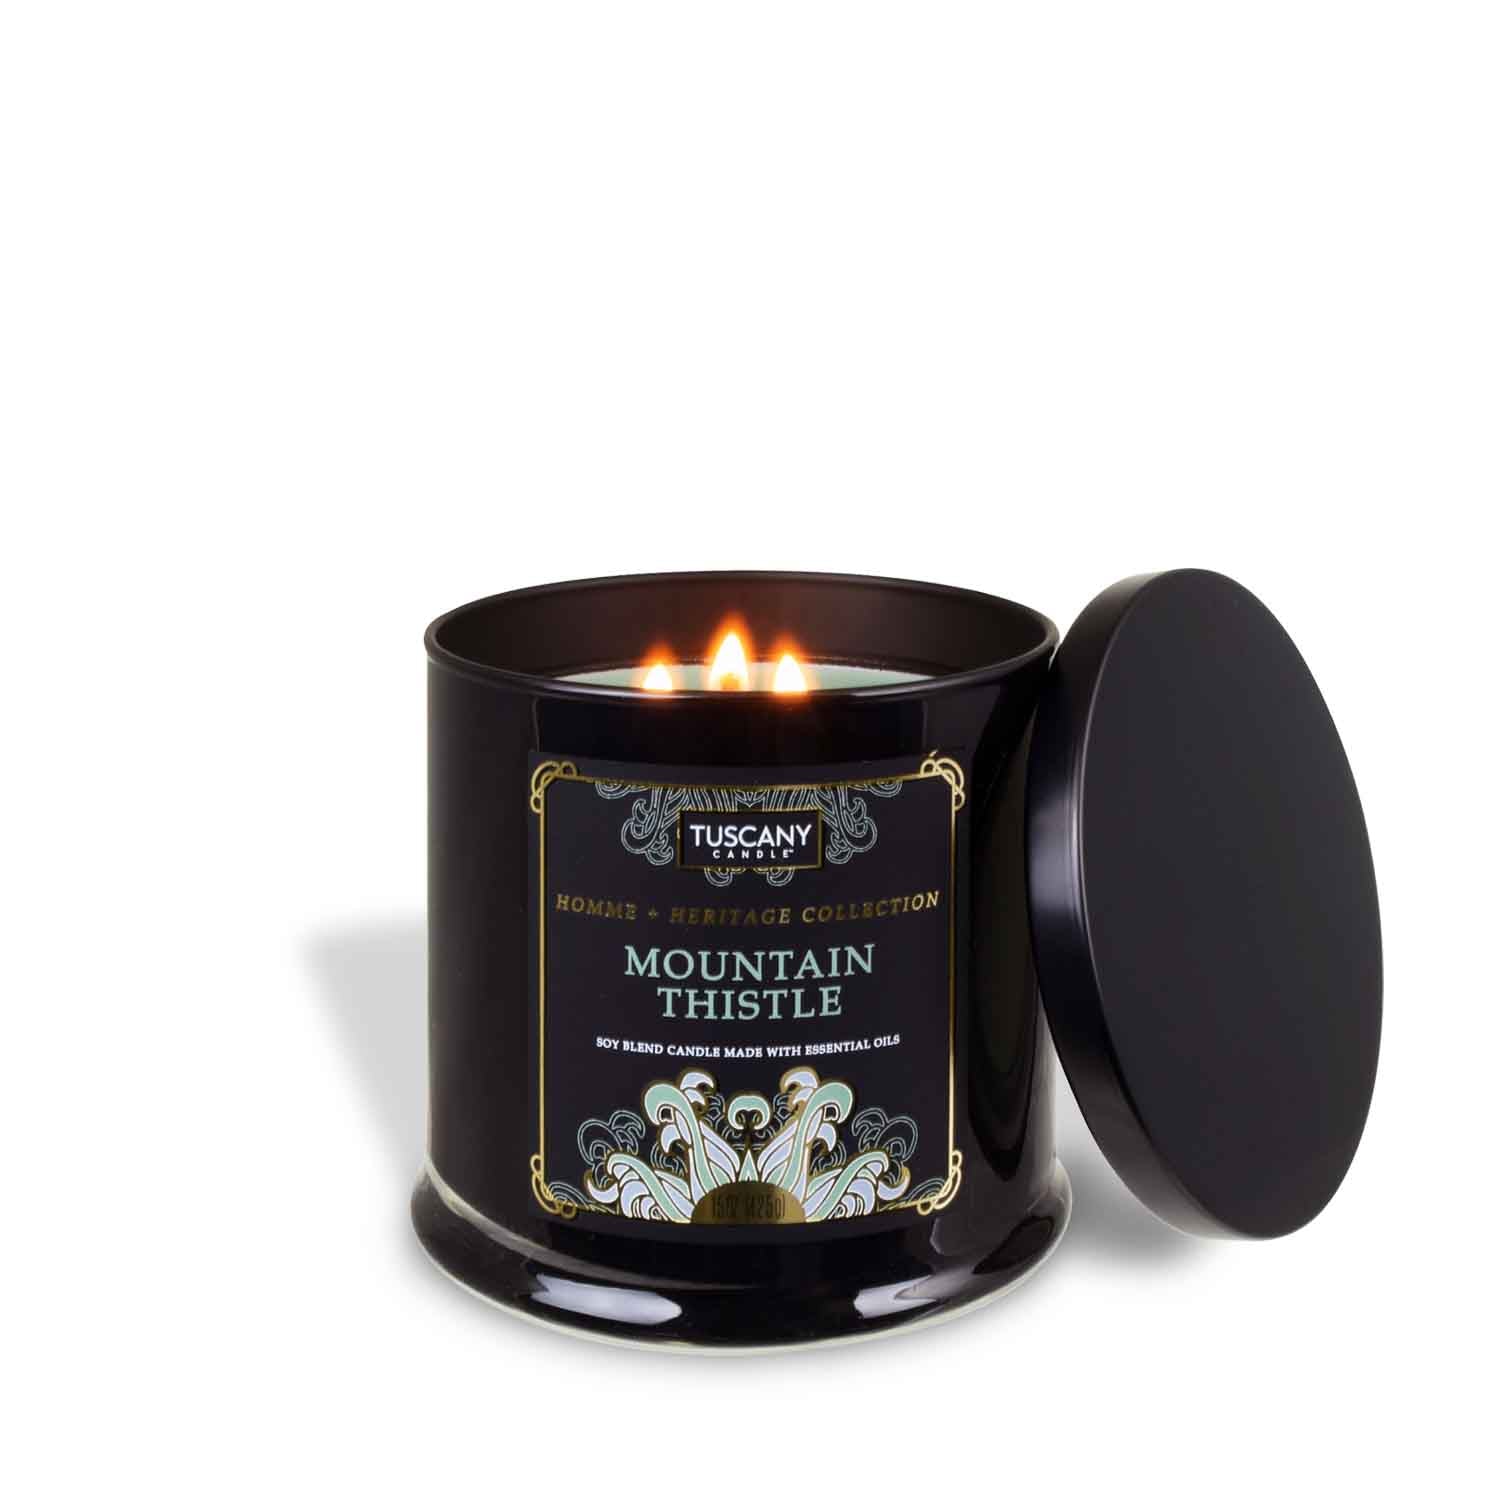 A Mountain Thistle Scented Jar Candle (15 oz) from Tuscany Candle on a white background, infused with essential oils from our Homme + Heritage Collection.